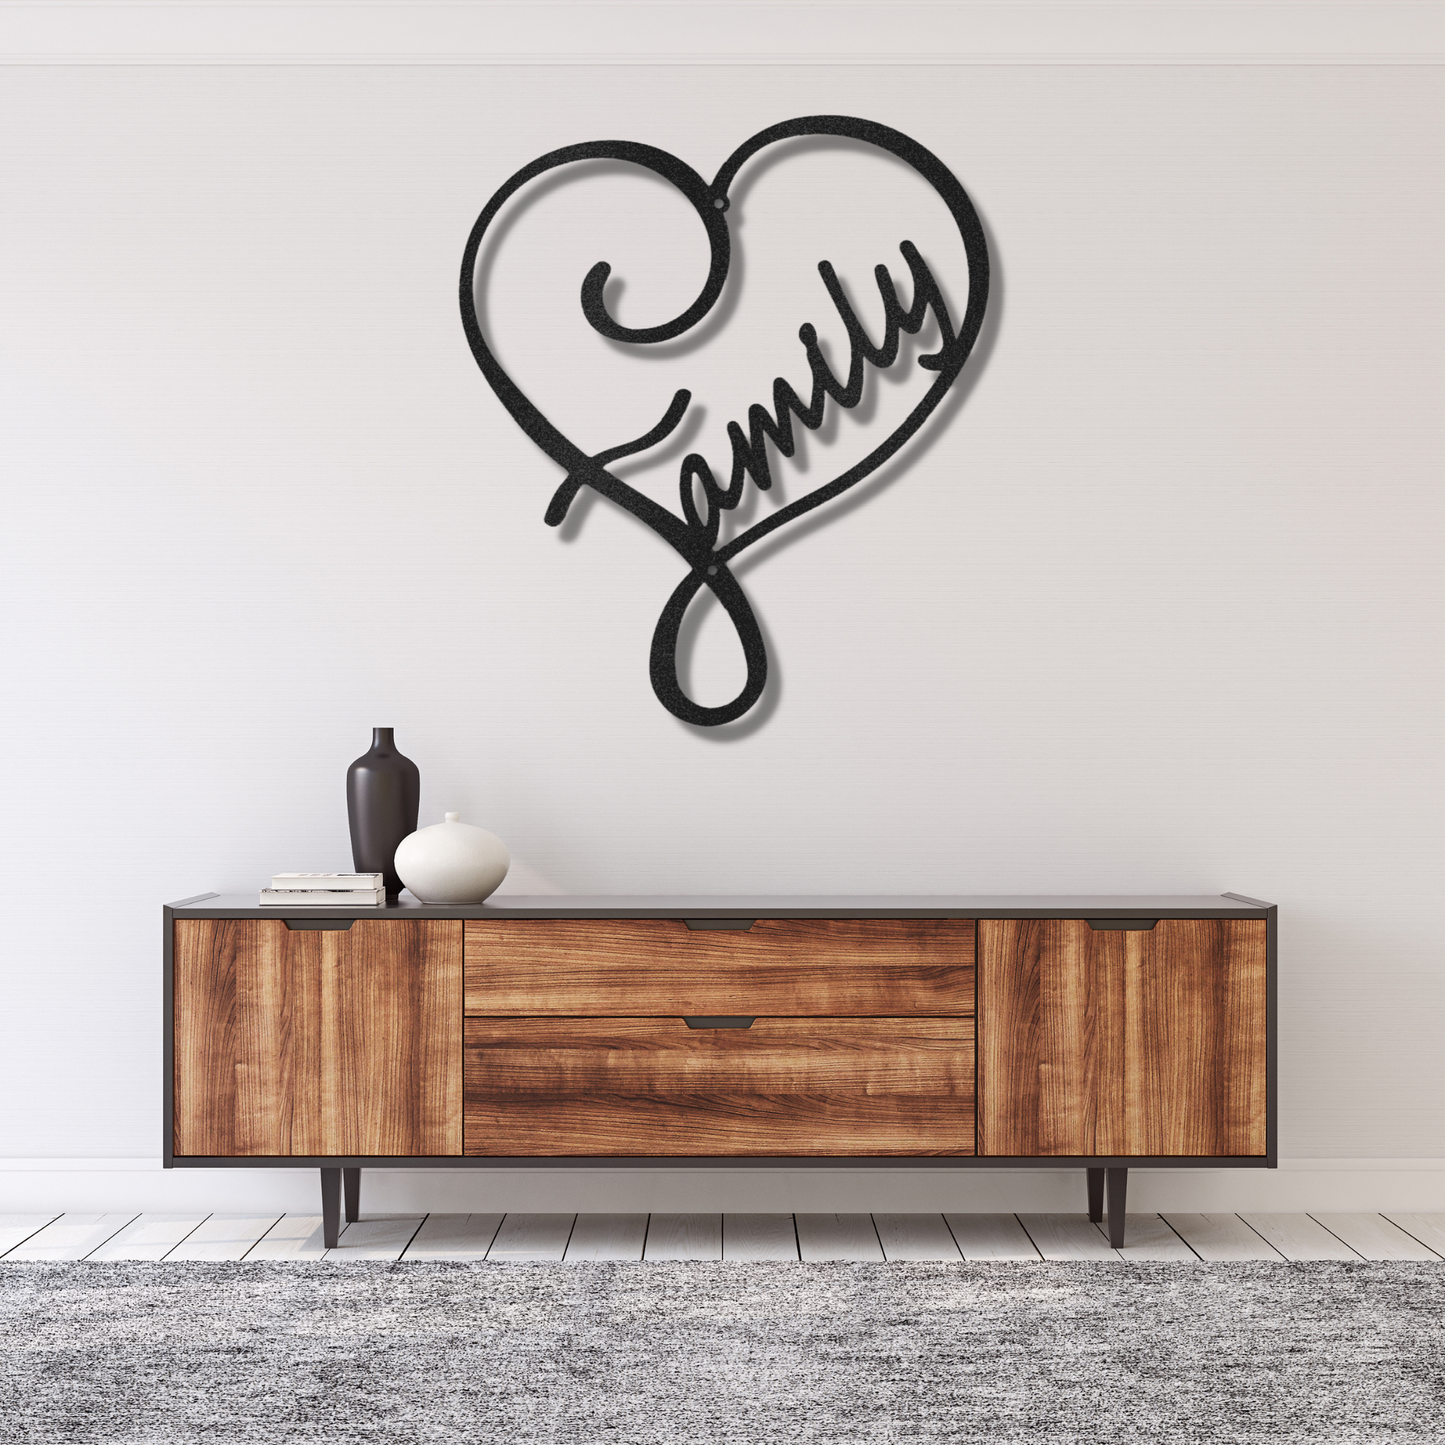 Family Love - Steel Sign, Personalized Metal Wall Decor, House Decor, Wall Art,  Metal Signs, Metal Decorative Sign, Indoor Sign